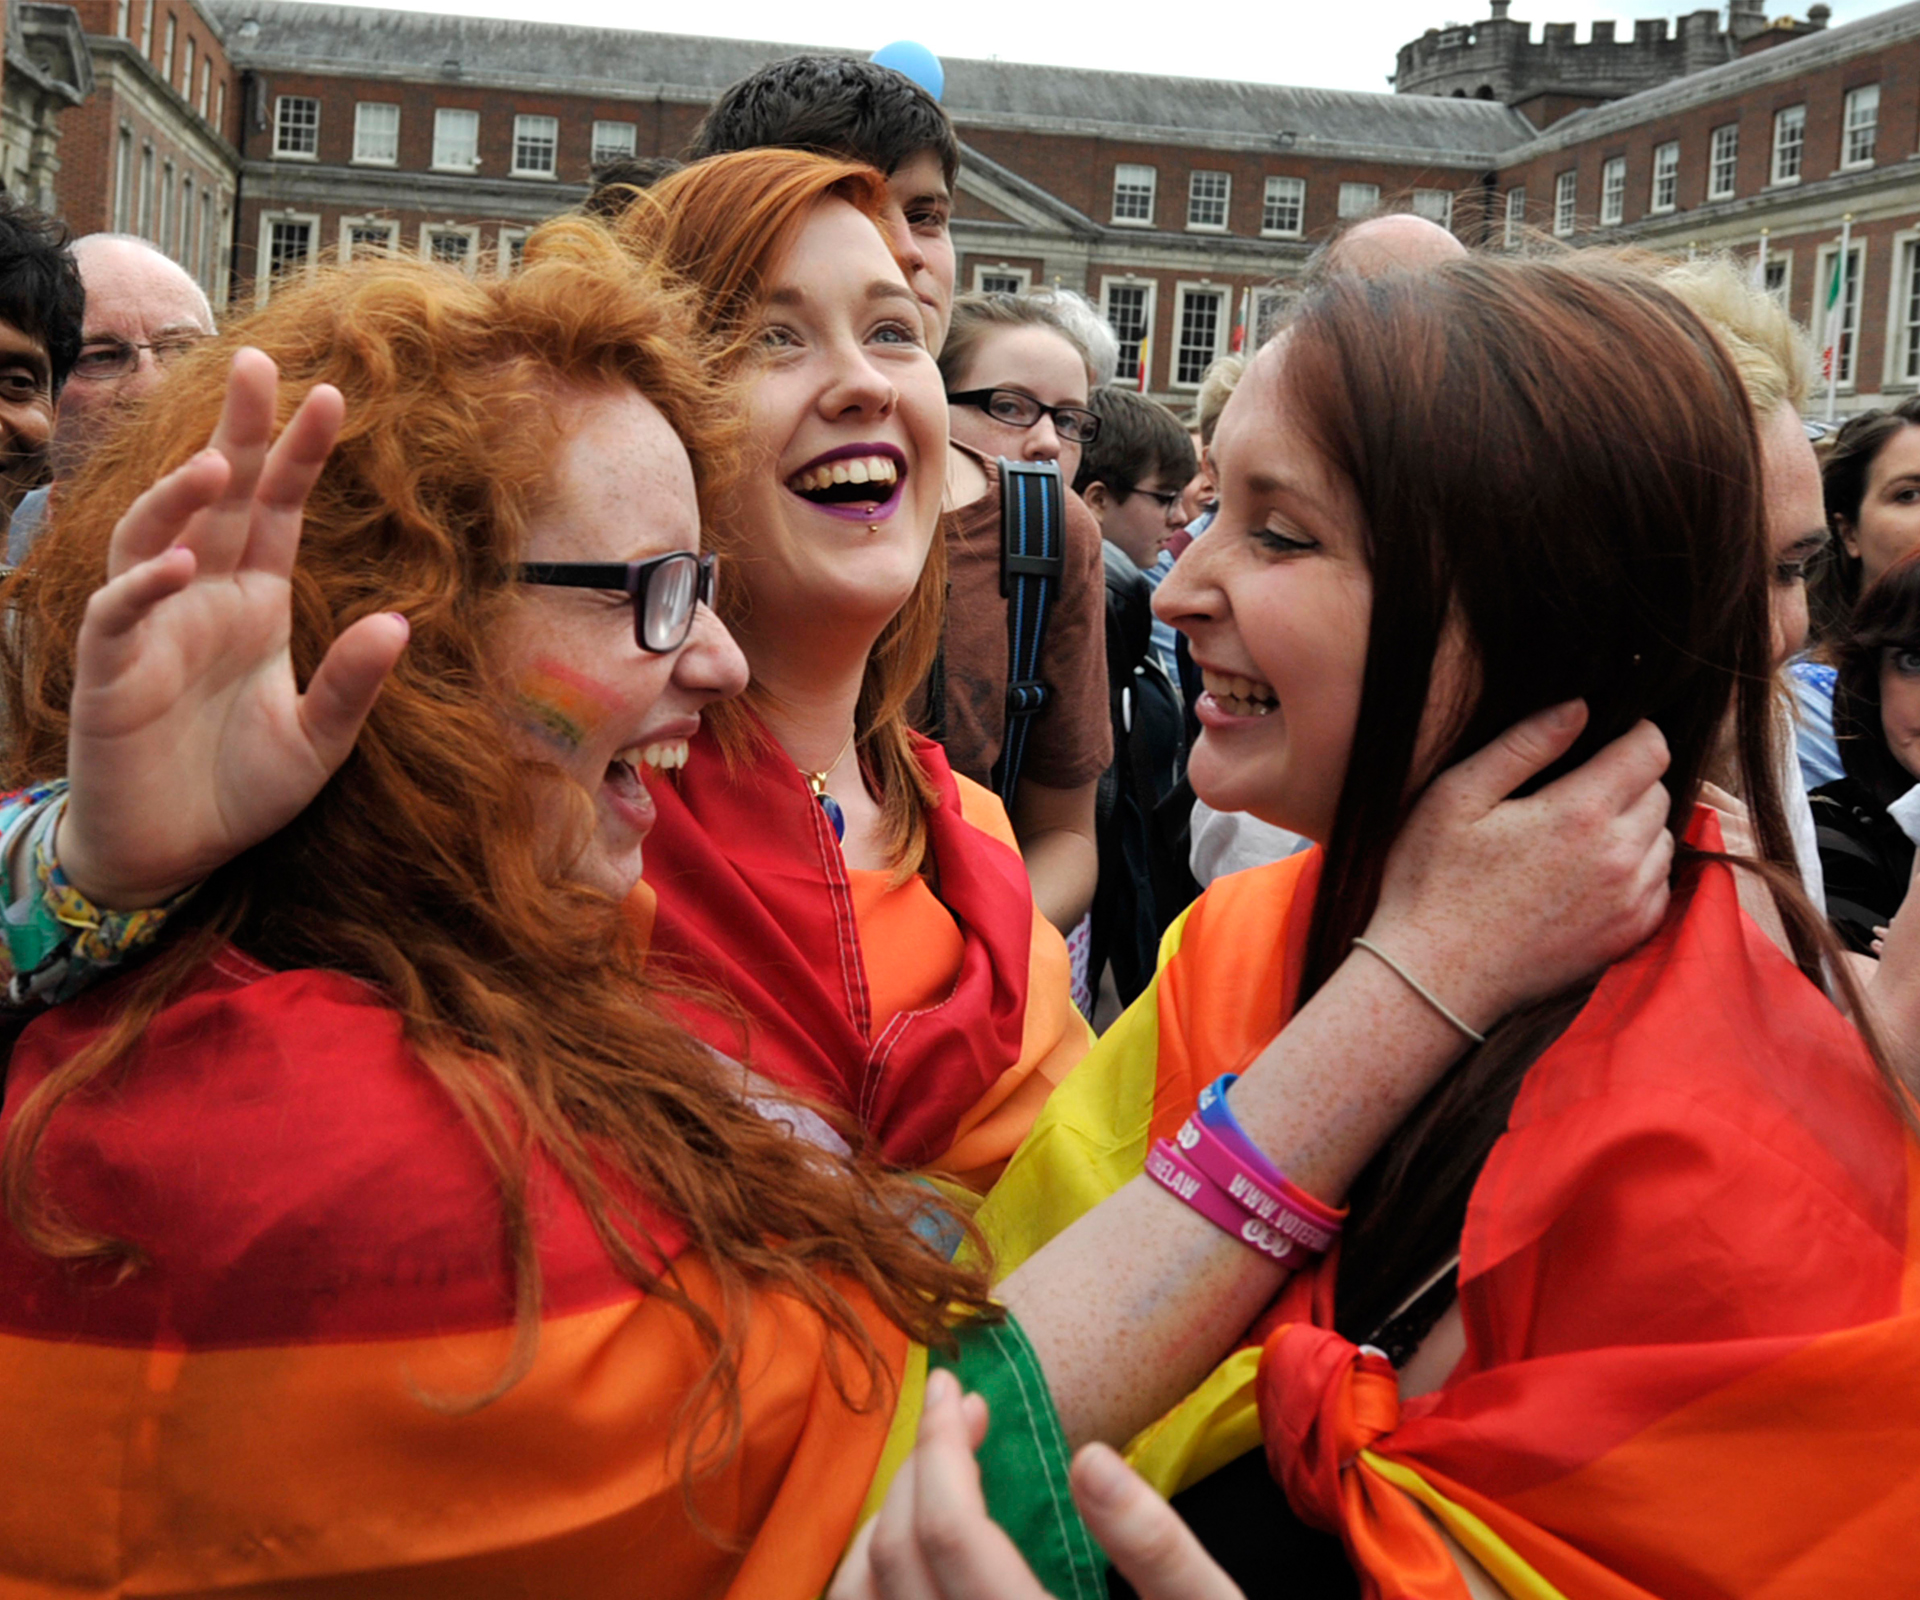 Same-sex marriage: Gay women join the debate